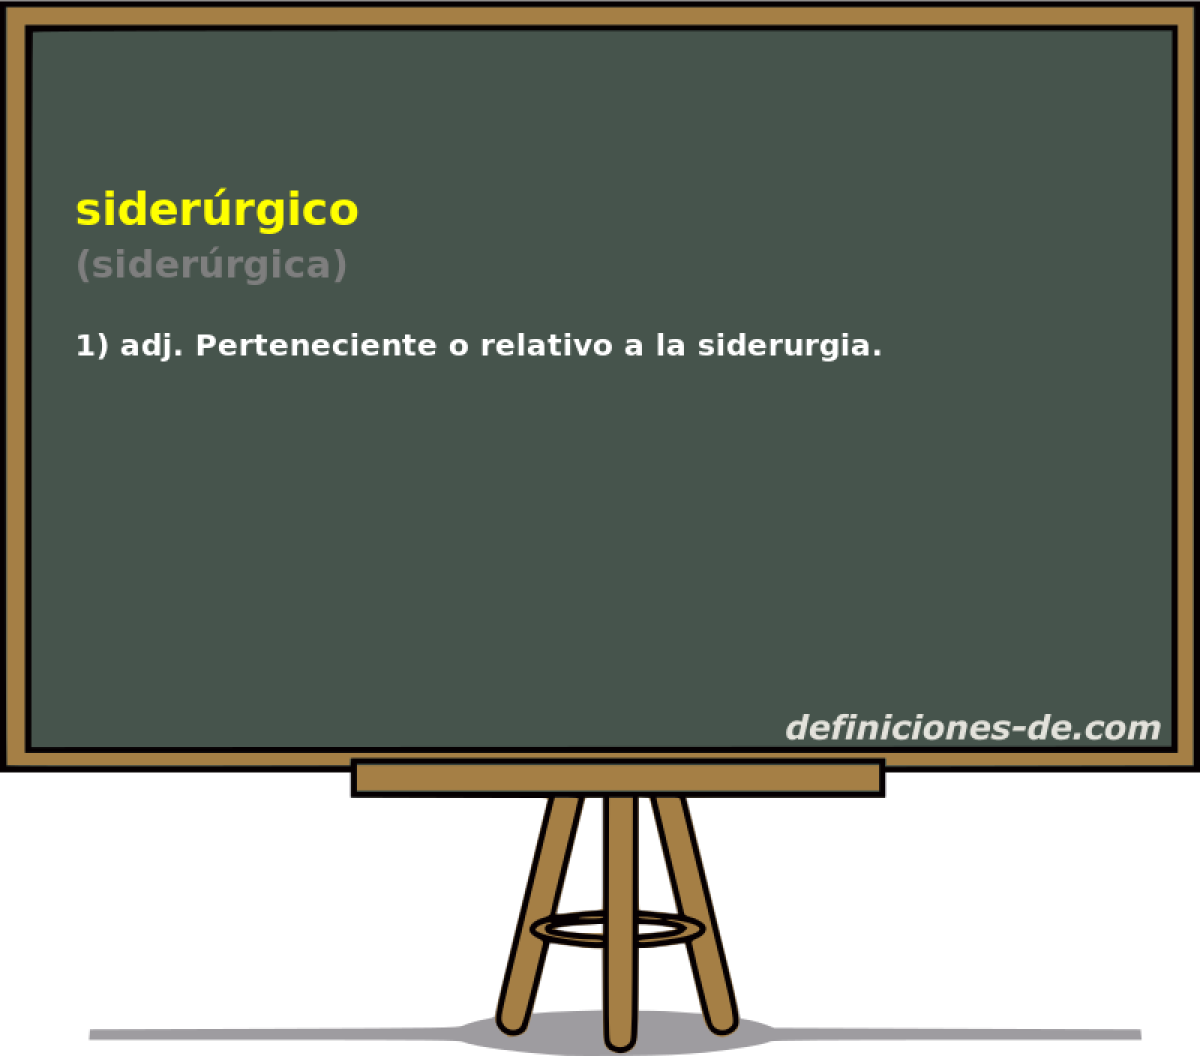 siderrgico (siderrgica)